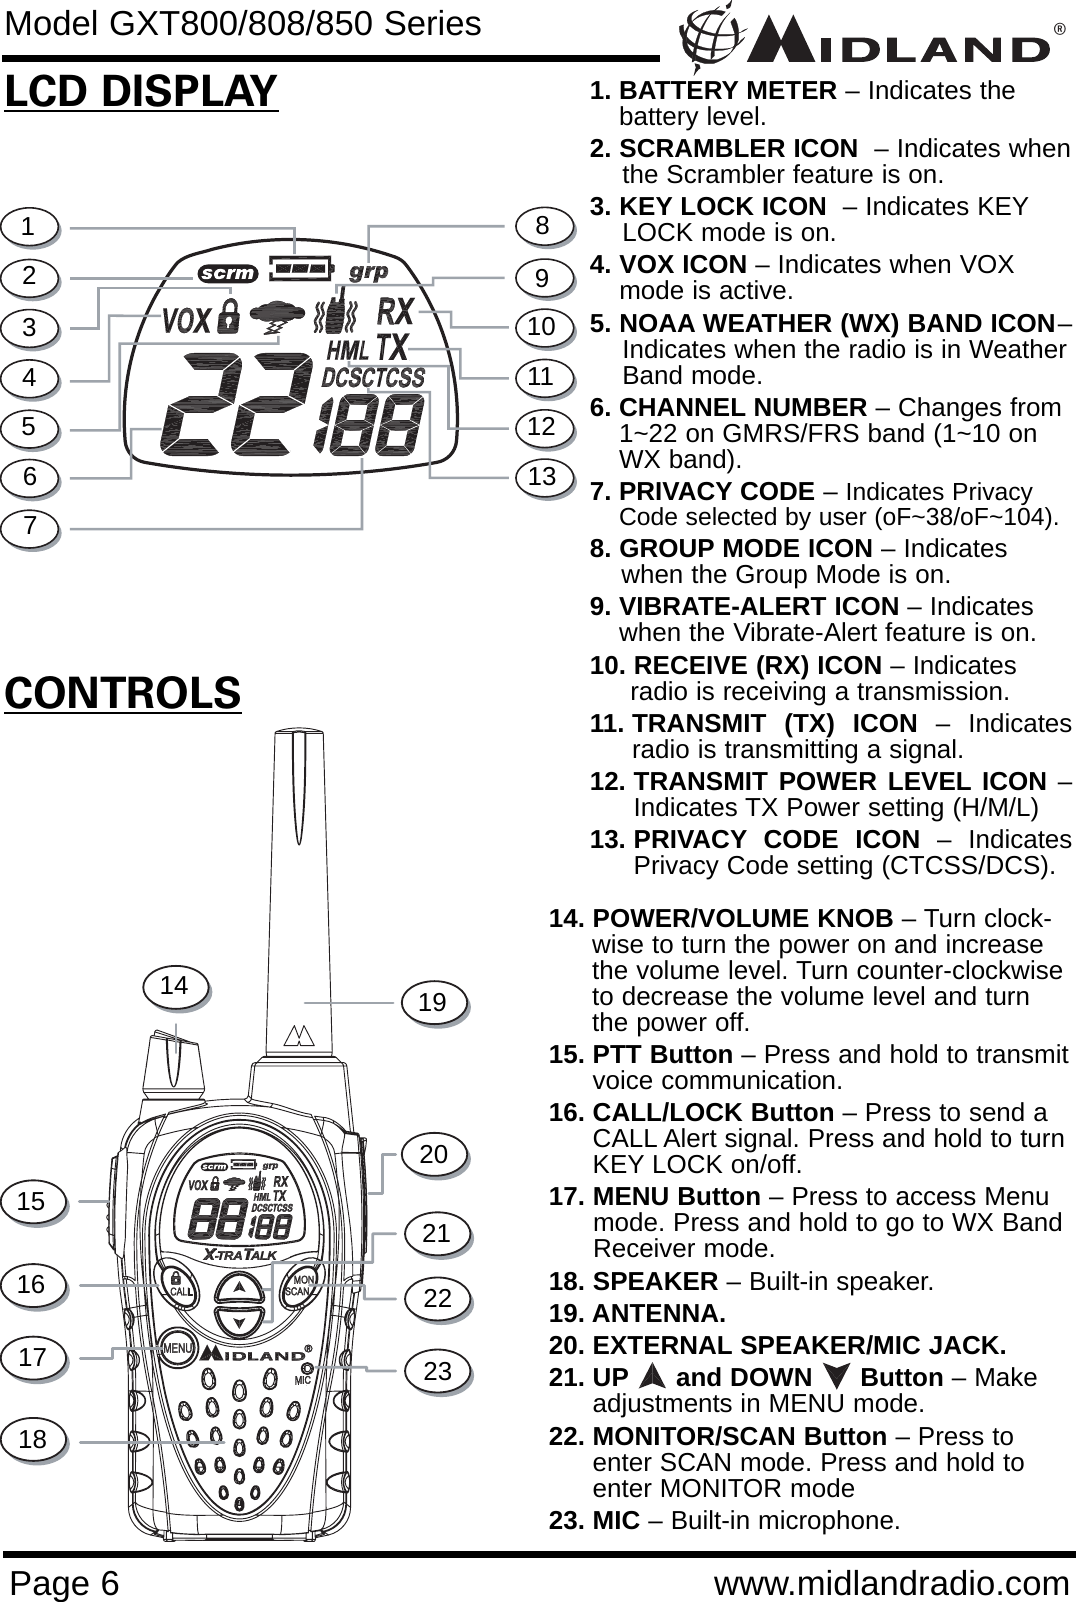 ®Page 6 www.midlandradio.comCONTROLSLCD DISPLAY1. BATTERY METER – Indicates thebattery level.2. SCRAMBLER ICON  – Indicates whenthe Scrambler feature is on. 3. KEY LOCK ICON  – Indicates KEYLOCK mode is on.4. VOX ICON – Indicates when VOX mode is active.5. NOAA WEATHER (WX) BAND ICON–Indicates when the radio is in WeatherBand mode.6. CHANNEL NUMBER – Changes from1~22 on GMRS/FRS band (1~10 onWX band).7. PRIVACY CODE – Indicates PrivacyCode selected by user (oF~38/oF~104).8. GROUP MODE ICON – Indicates when the Group Mode is on.  9. VIBRATE-ALERT ICON – Indicates when the Vibrate-Alert feature is on. 10. RECEIVE (RX) ICON – Indicates radio is receiving a transmission.11. TRANSMIT (TX) ICON – Indicatesradio is transmitting a signal.12. TRANSMIT POWER LEVEL ICON –Indicates TX Power setting (H/M/L)13. PRIVACY CODE ICON – IndicatesPrivacy Code setting (CTCSS/DCS).14. POWER/VOLUME KNOB – Turn clock-wise to turn the power on and increasethe volume level. Turn counter-clockwiseto decrease the volume level and turnthe power off.15. PTT Button – Press and hold to transmitvoice communication. 16. CALL/LOCK Button – Press to send aCALL Alert signal. Press and hold to turnKEY LOCK on/off.17. MENU Button – Press to access Menu mode. Press and hold to go to WX Band Receiver mode.18. SPEAKER – Built-in speaker.19. ANTENNA.20. EXTERNAL SPEAKER/MIC JACK.21. UP and DOWN      Button – Makeadjustments in MENU mode.22. MONITOR/SCAN Button – Press toenter SCAN mode. Press and hold toenter MONITOR mode23. MIC – Built-in microphone.1234567891014151617182322212019Model GXT800/808/850 Series111213